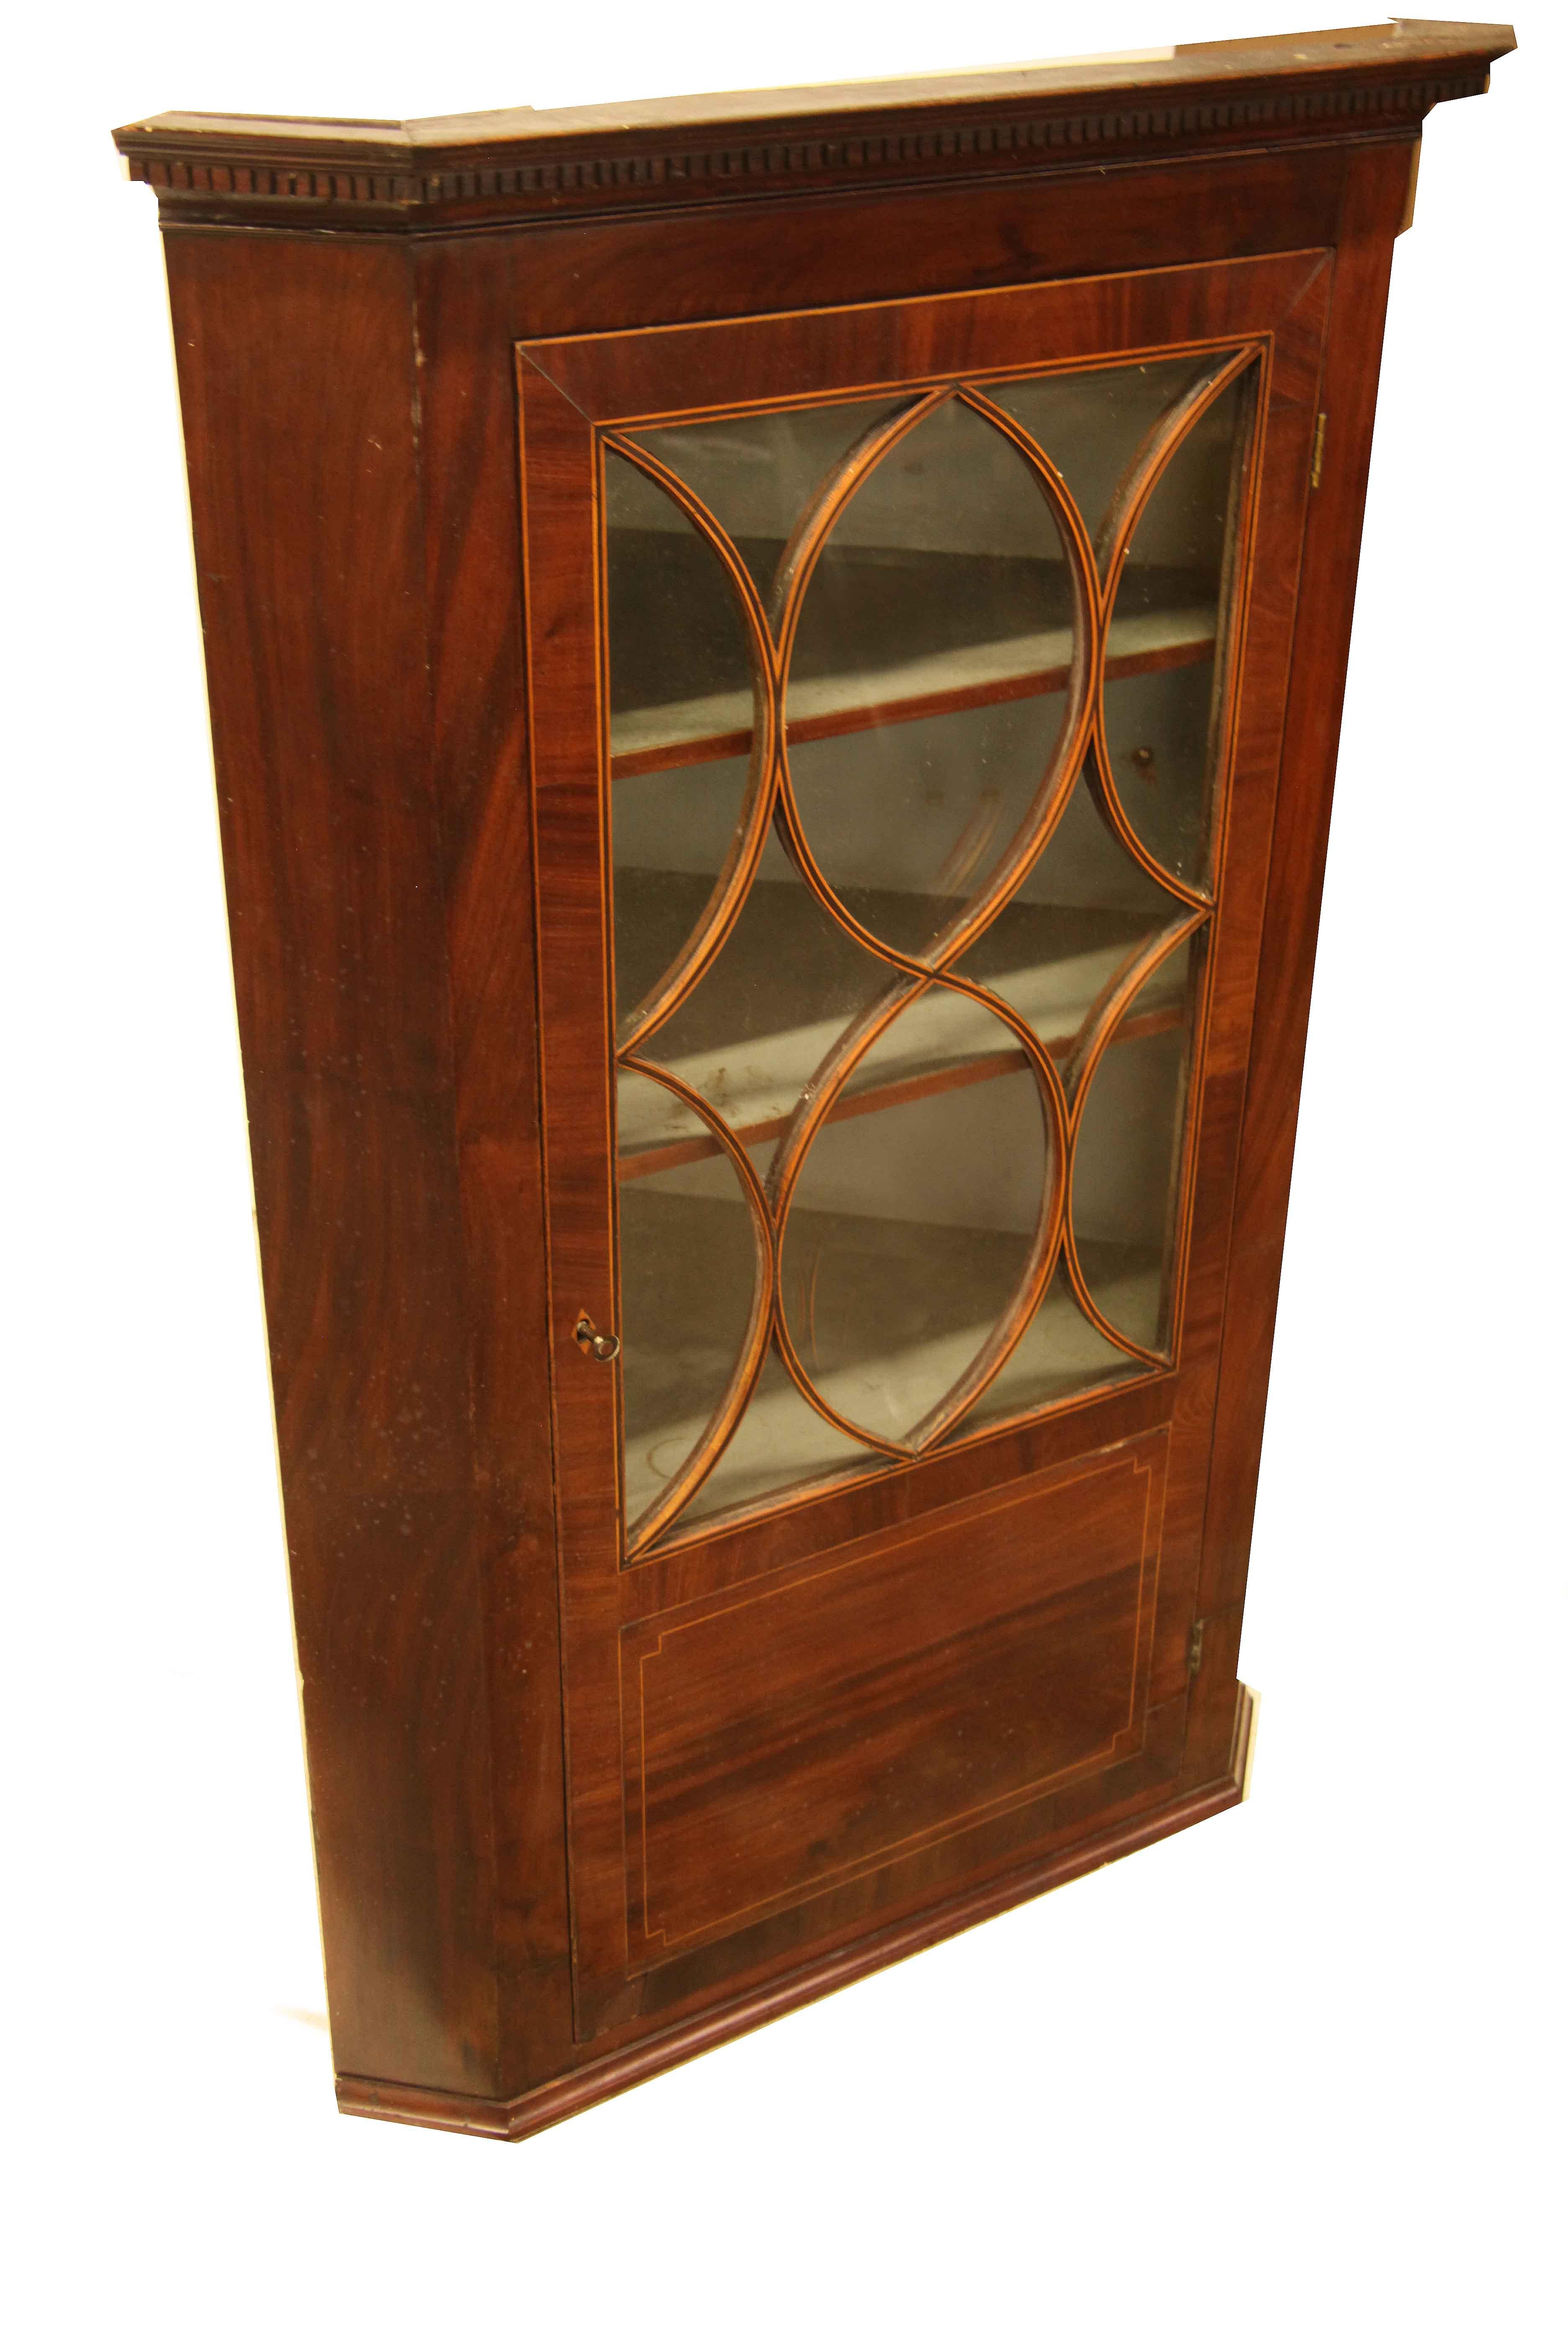 English inlaid glass door hanging corner cupboard, the cove cornice features bold dentil molding, the glass door is cross banded with mahogany and has curvilinear muntins faced with bands of mahogany and boxwood; lower portion of the door has a